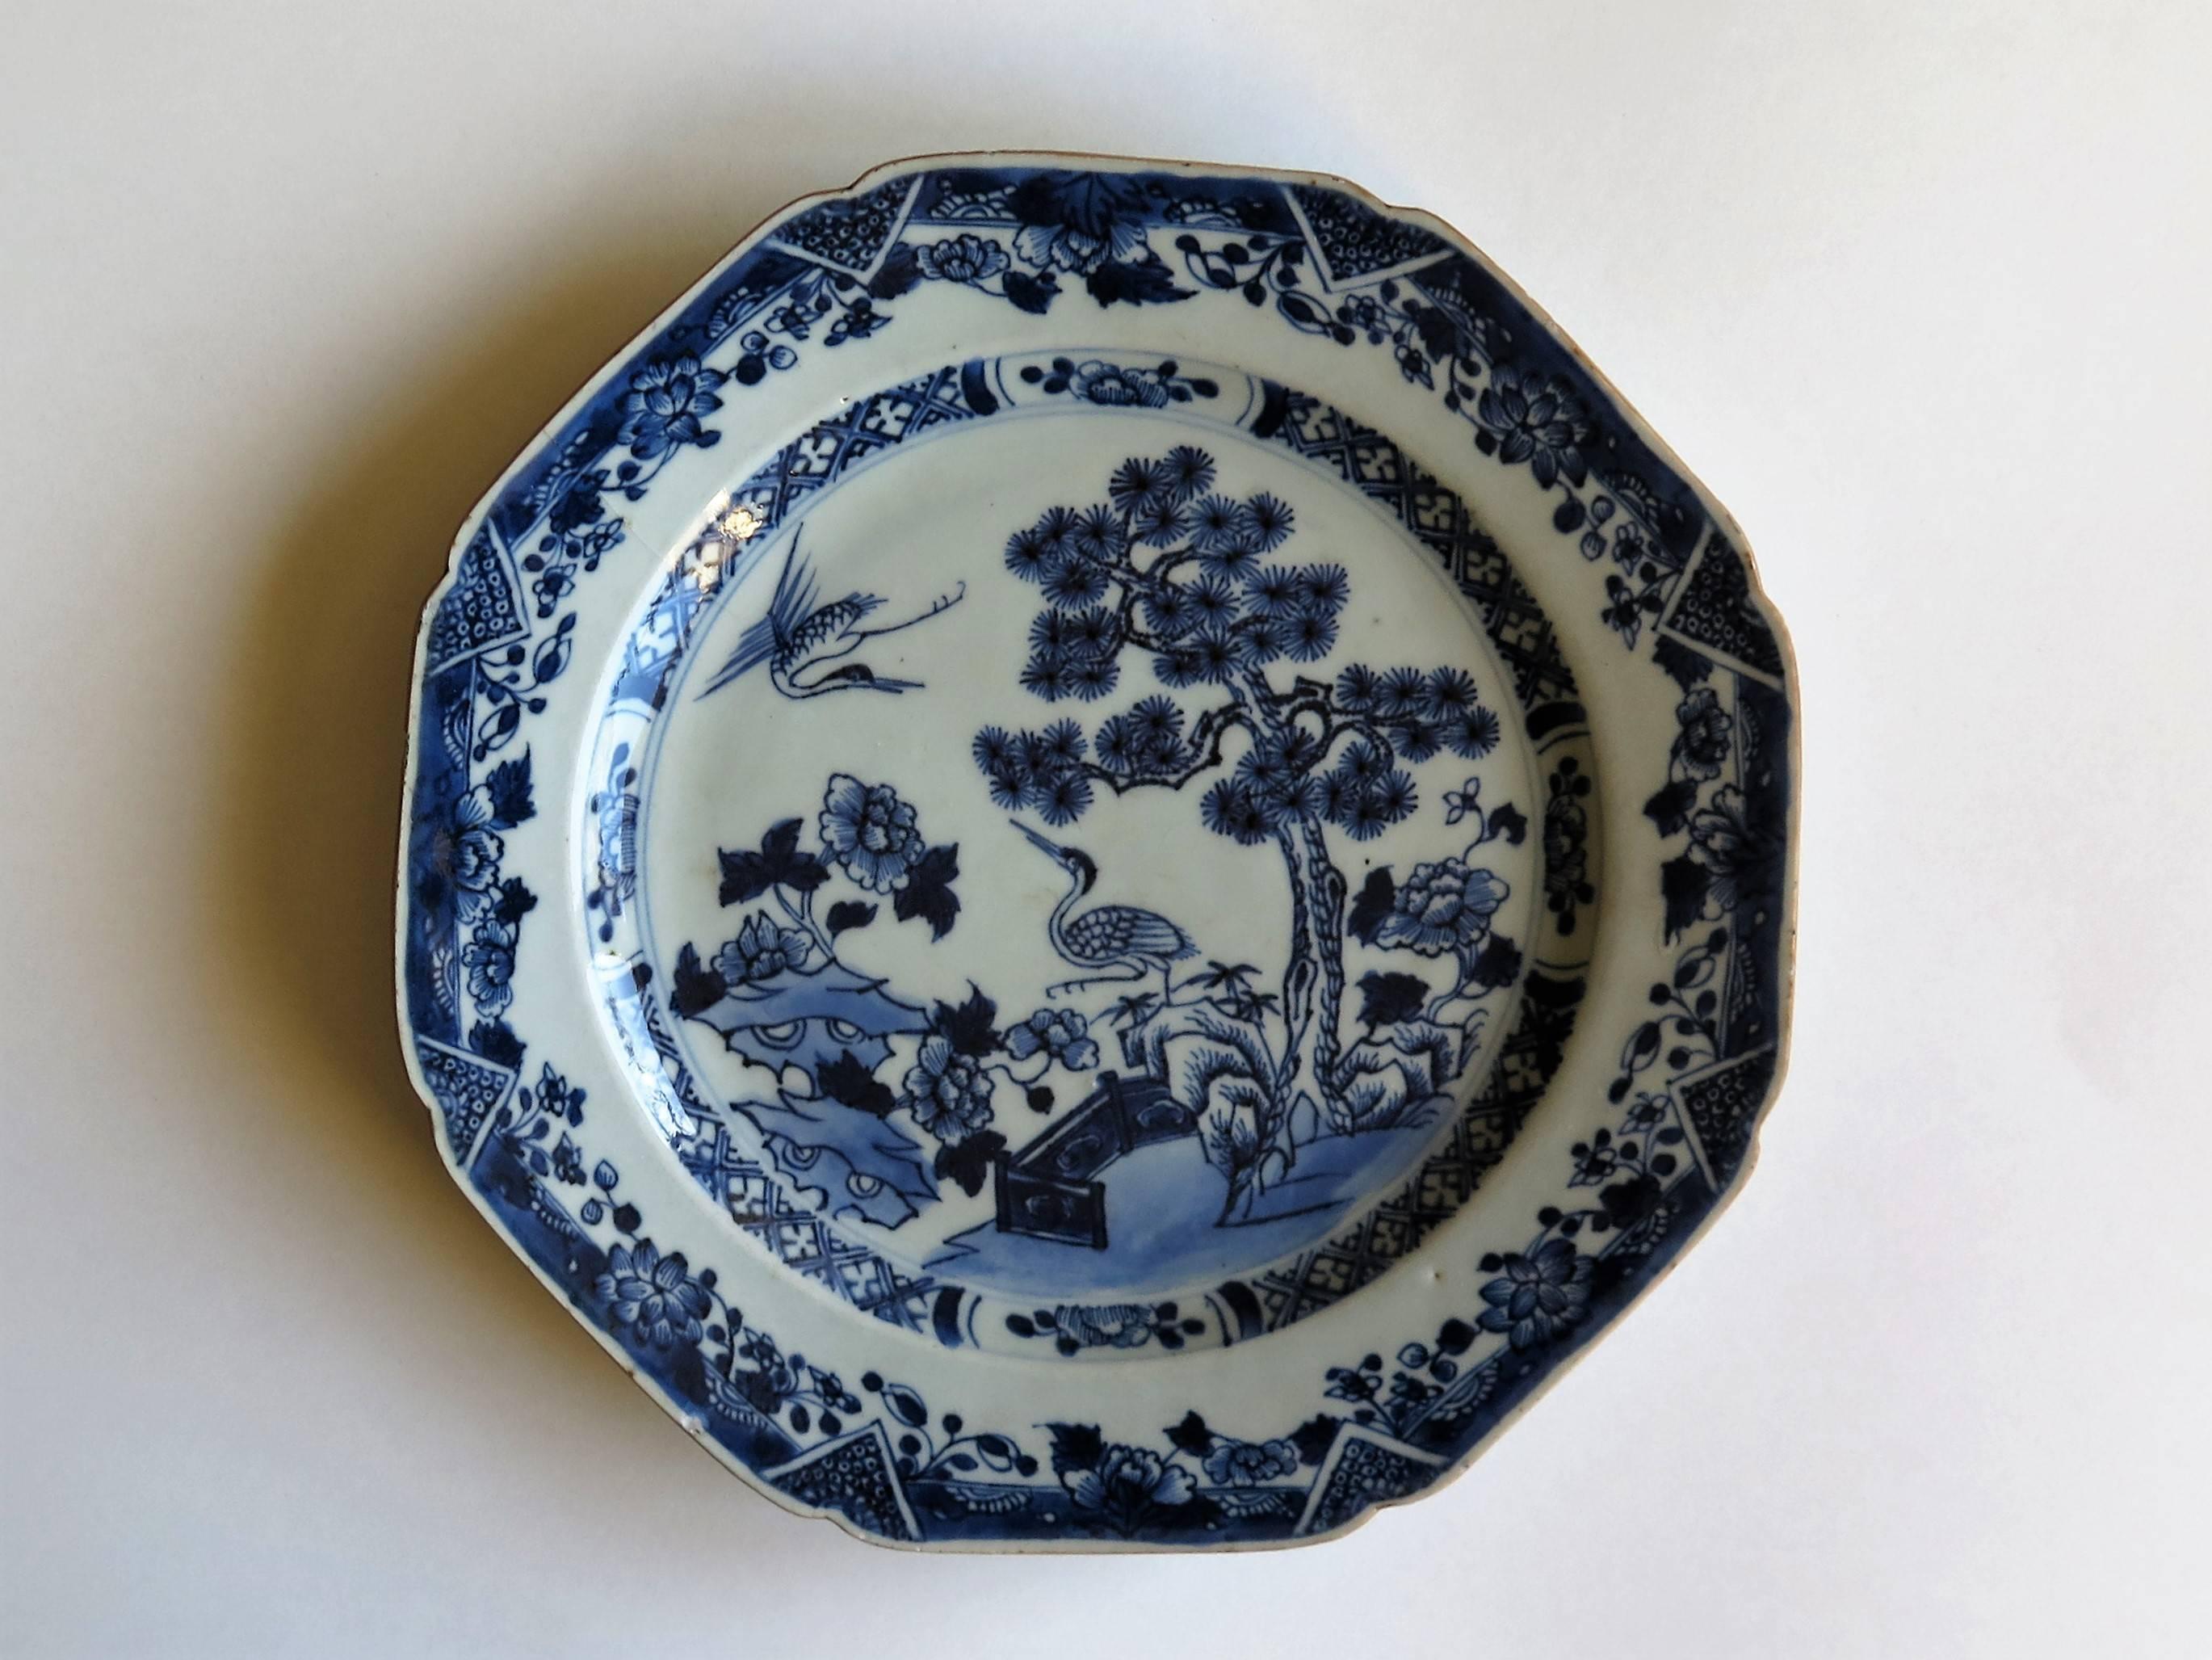 This is a Chinese porcelain plate made for the export (Canton) market, during the Qing dynasty in the second half of the 18th century, circa 1770.

The plate is octagonal and is very well hand decorated in varying shades of cobalt blue in a free